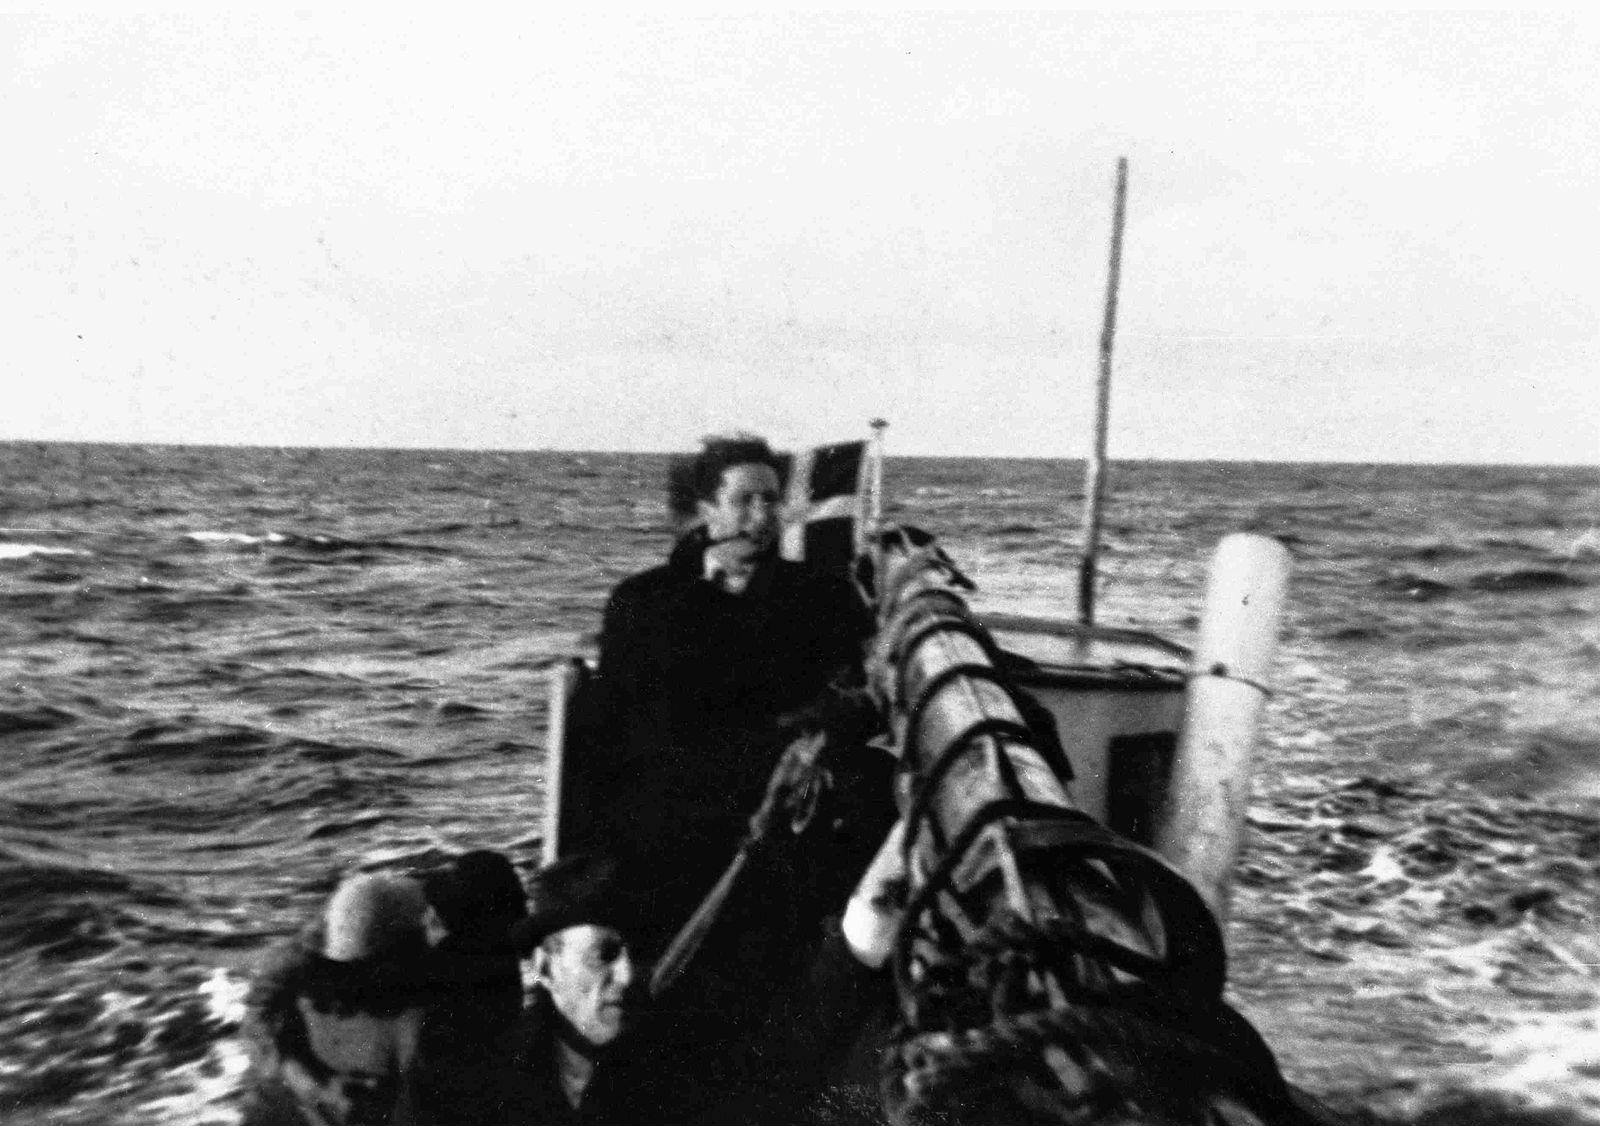 Boat with Jews sailing from Falster, Denmark to Ystad in Sweden, taken between September 1943 and October 1943.